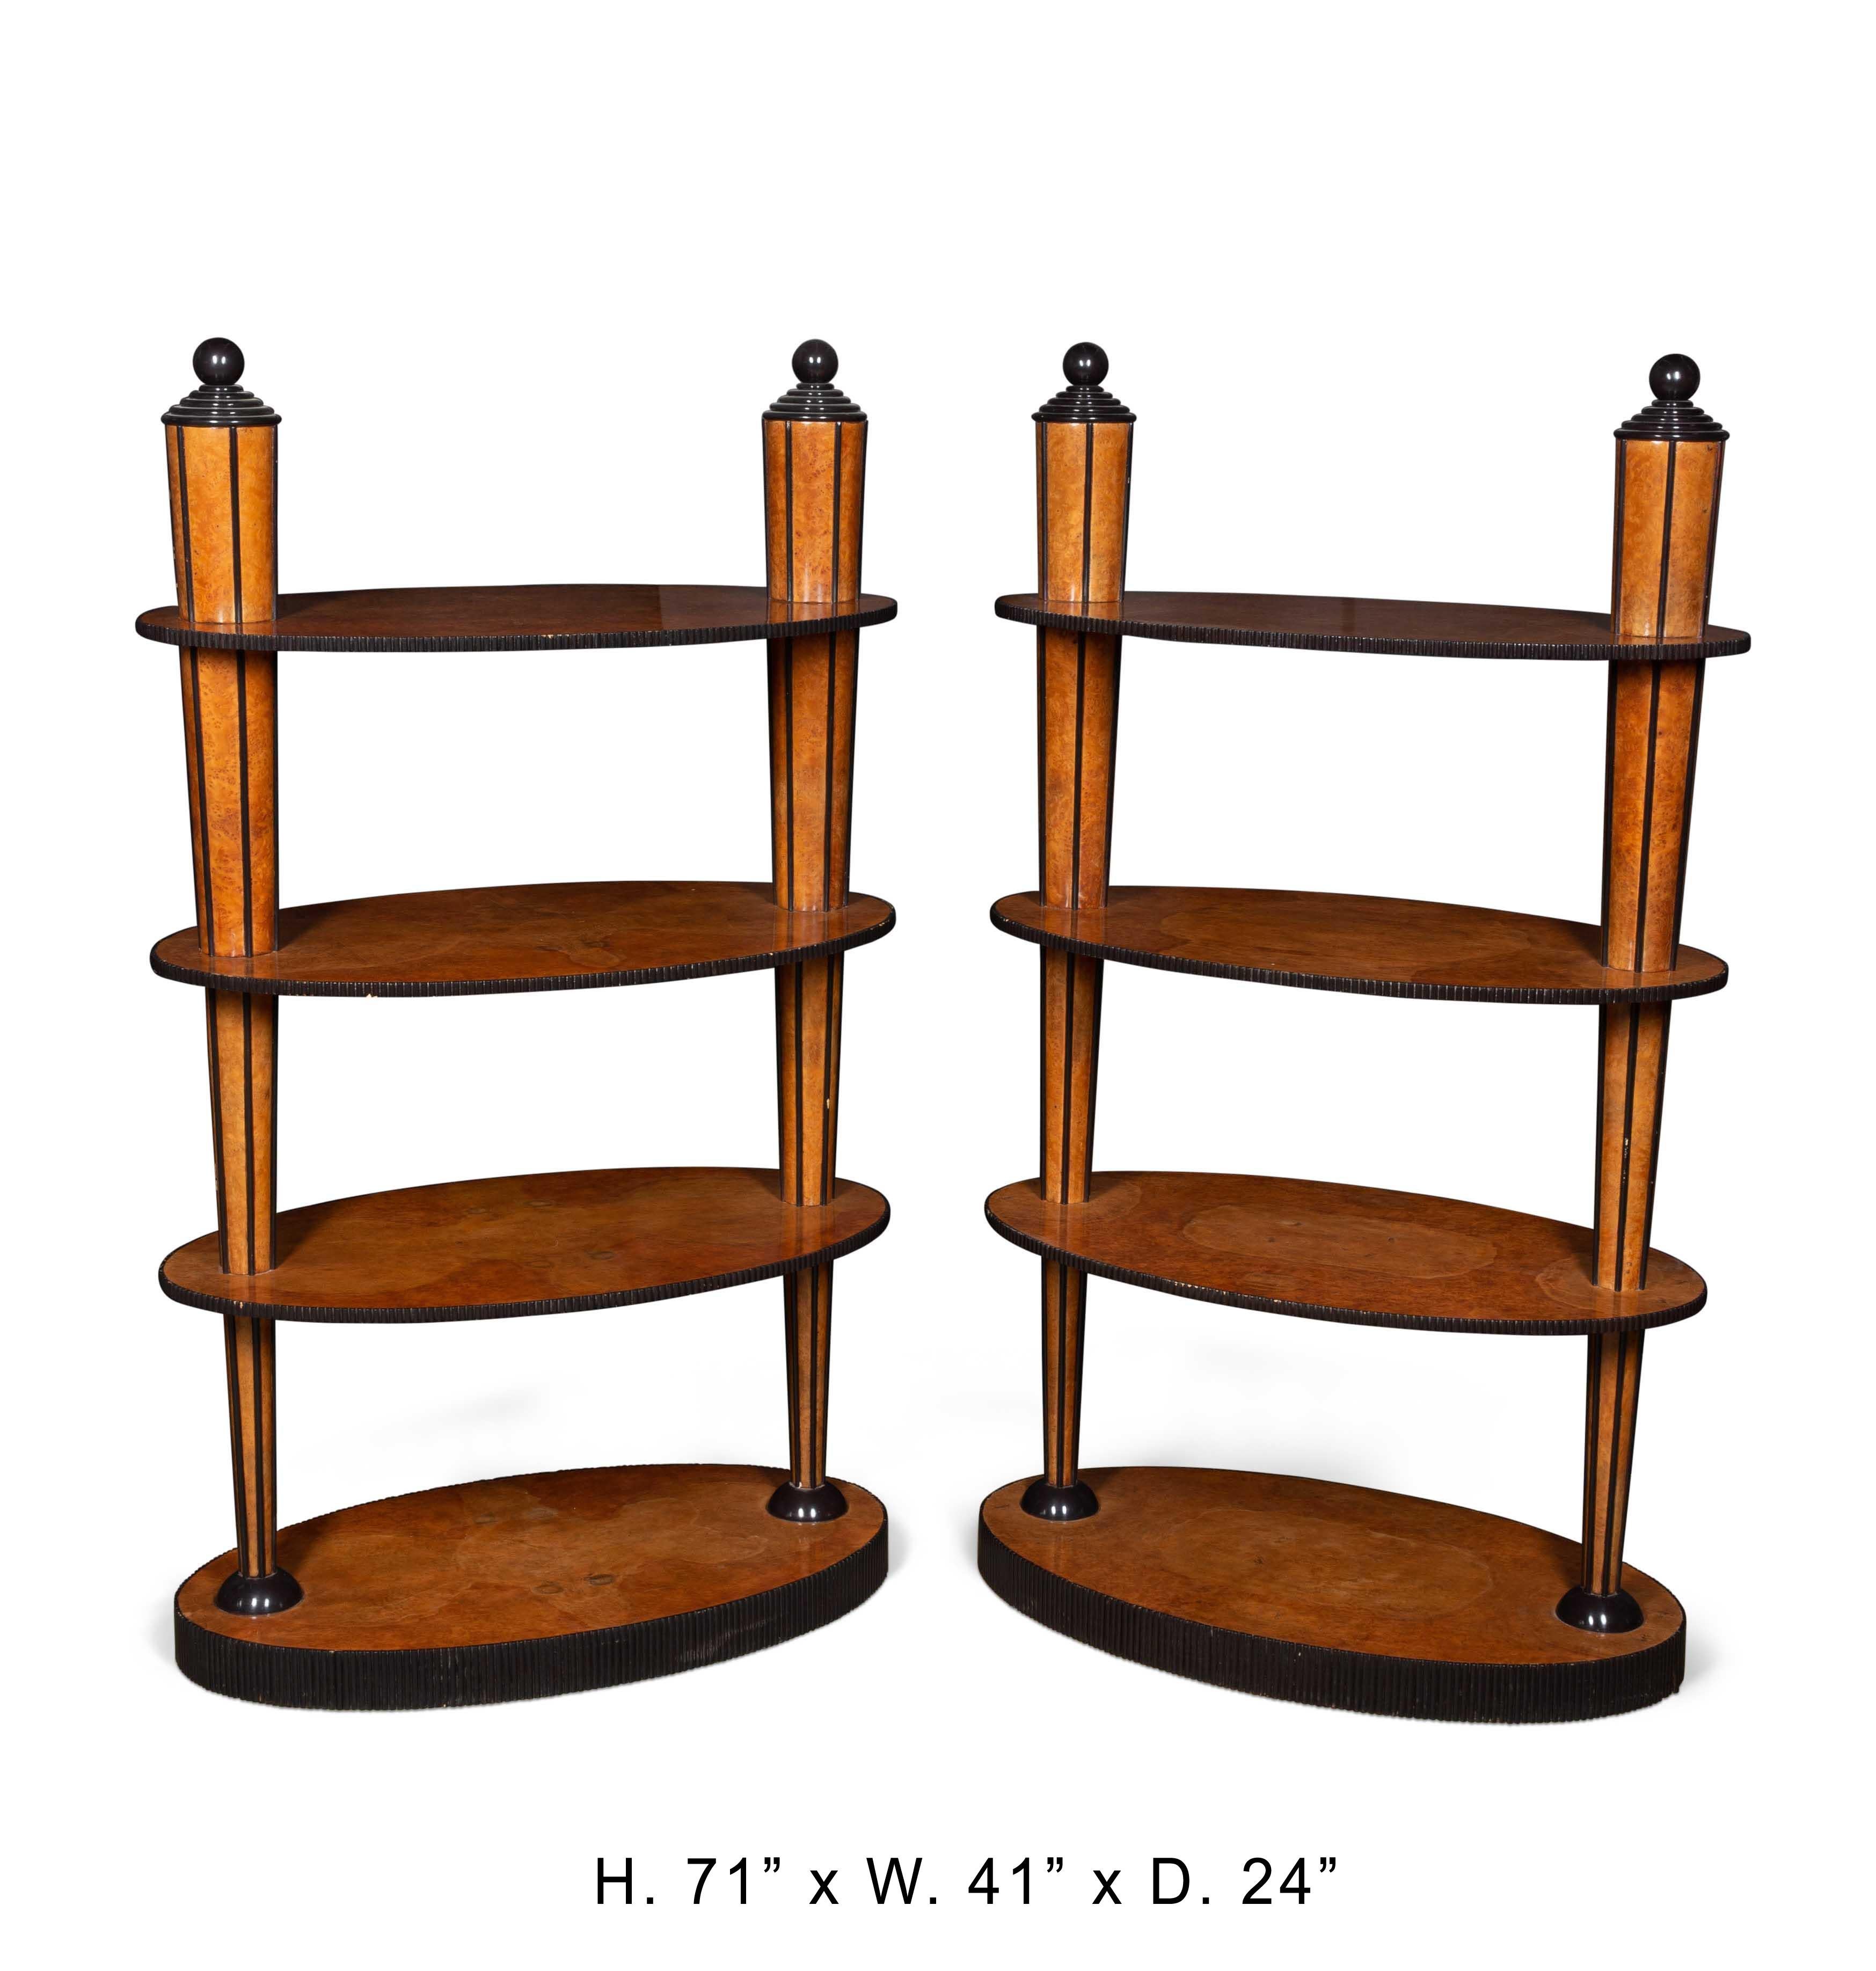 Outstanding 19 century pair English ebonized and burlwood oval etageres shelving.
Each etagere has four oval shelves held by two tapered columns and all veneered with burlwood and inlaid with ebony .
The most unusual etageres we have seen in 40